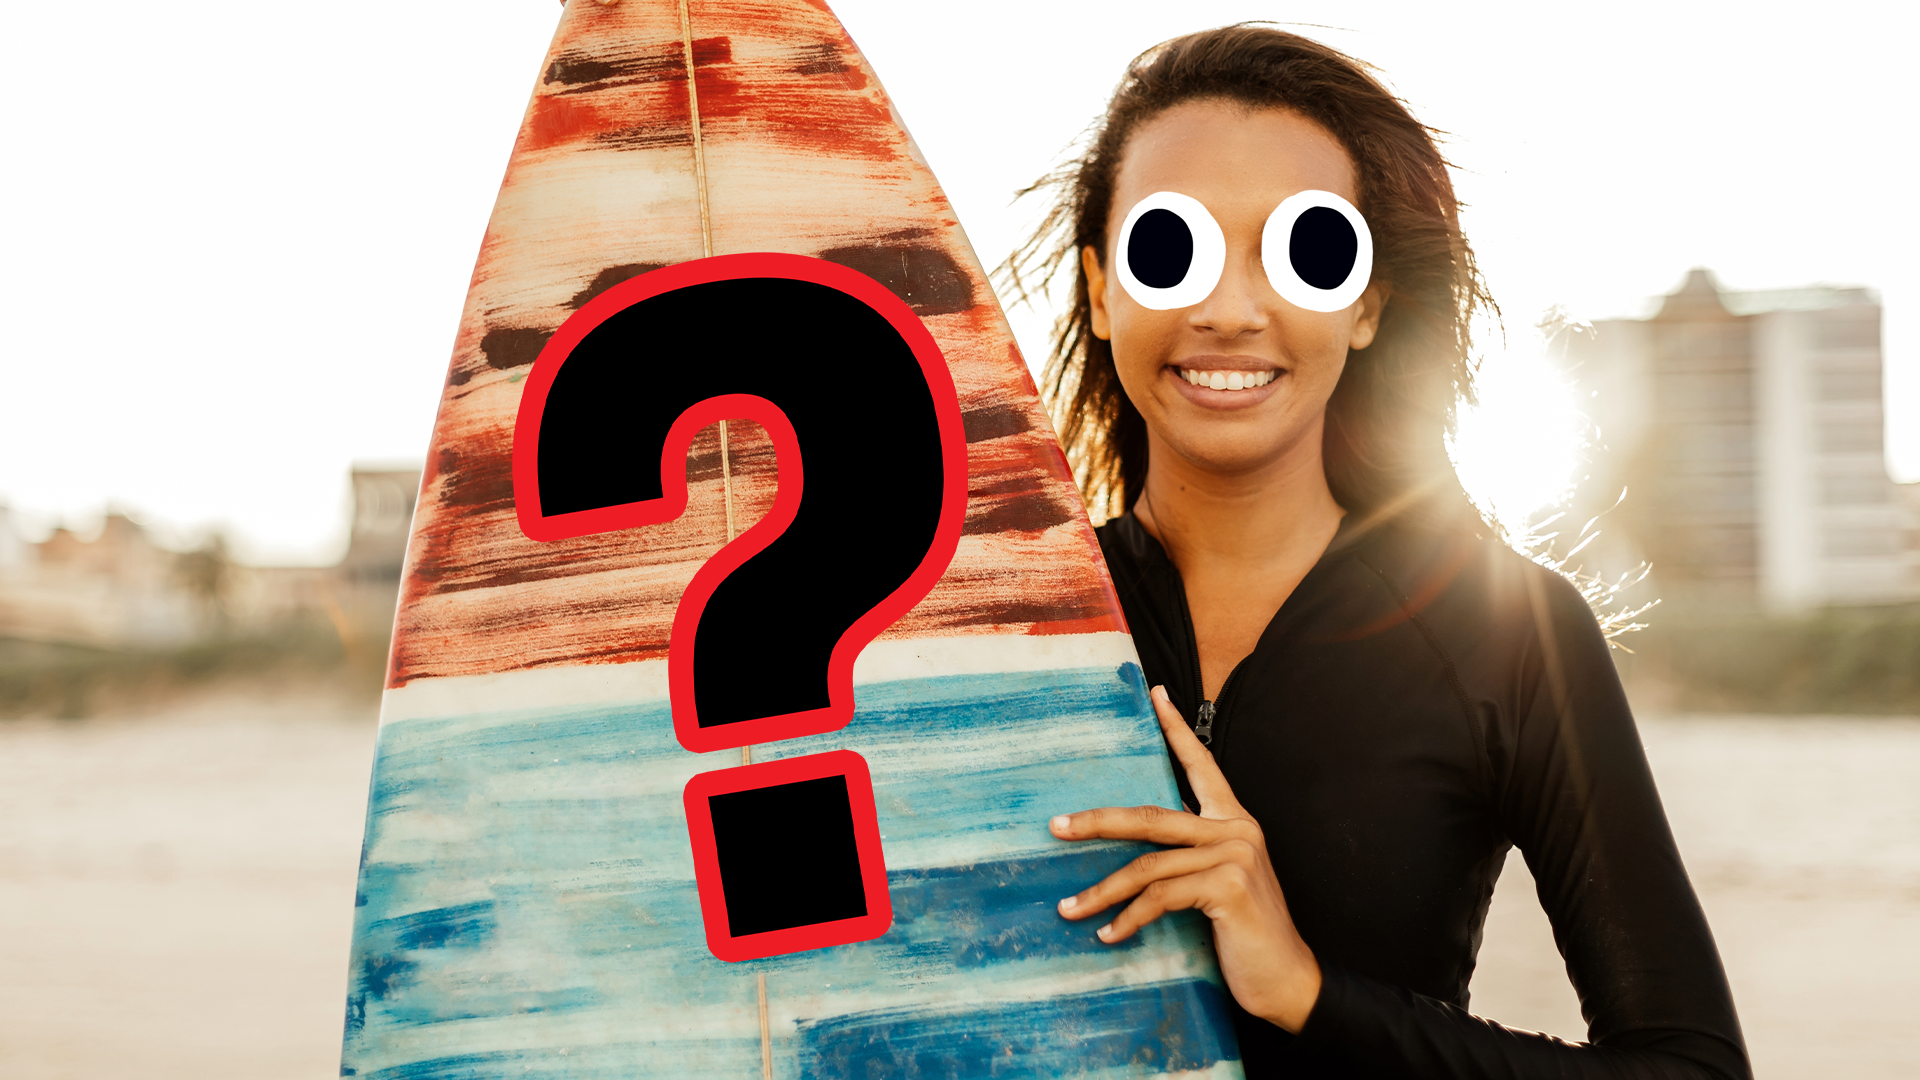 Woman with surfboard and question mark